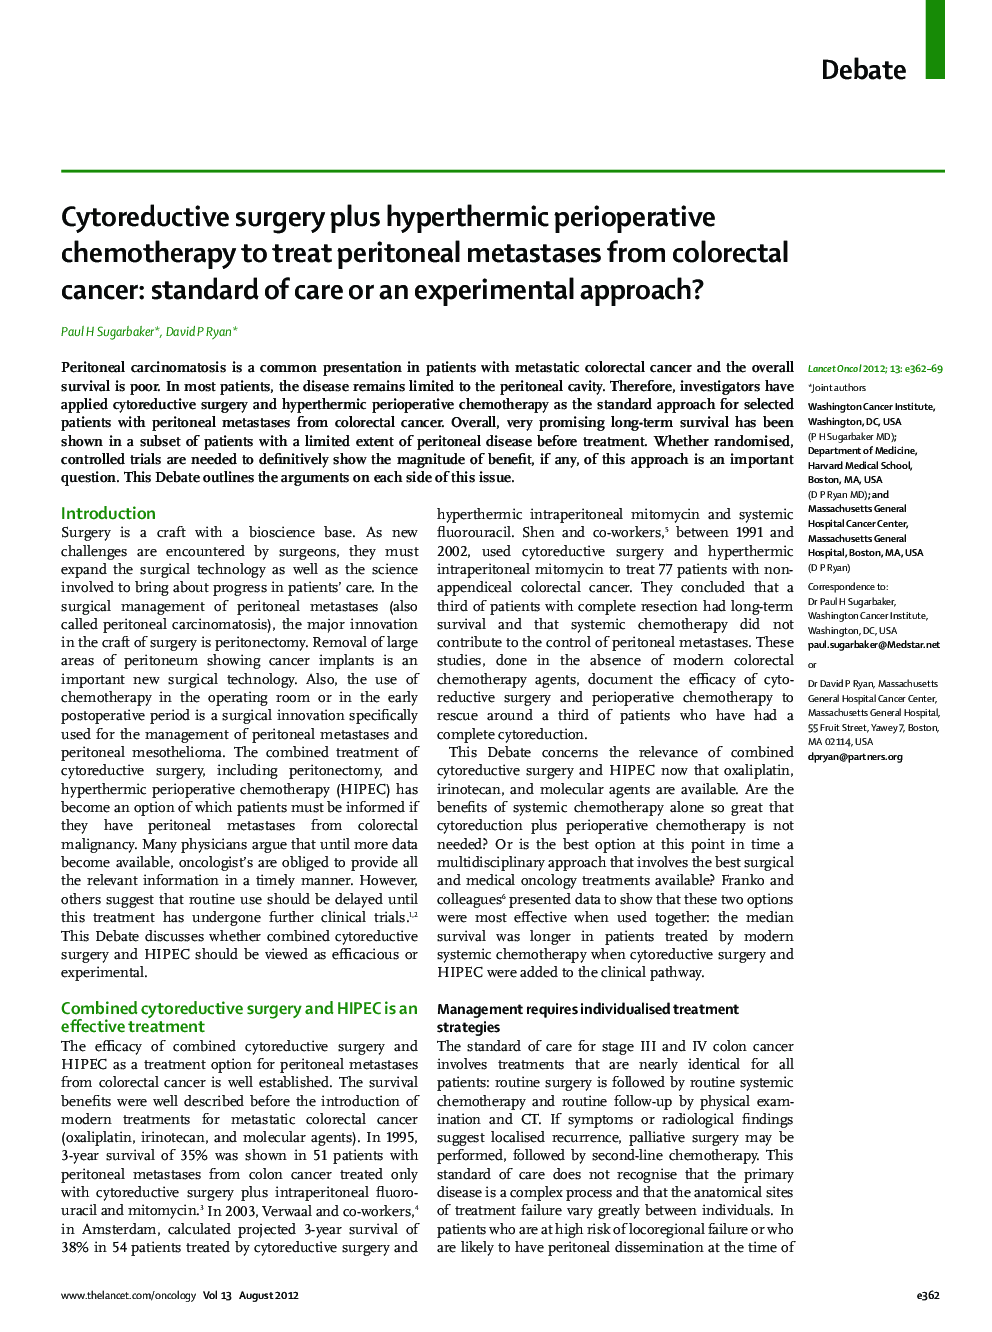 Cytoreductive surgery plus hyperthermic perioperative chemotherapy to treat peritoneal metastases from colorectal cancer: standard of care or an experimental approach?